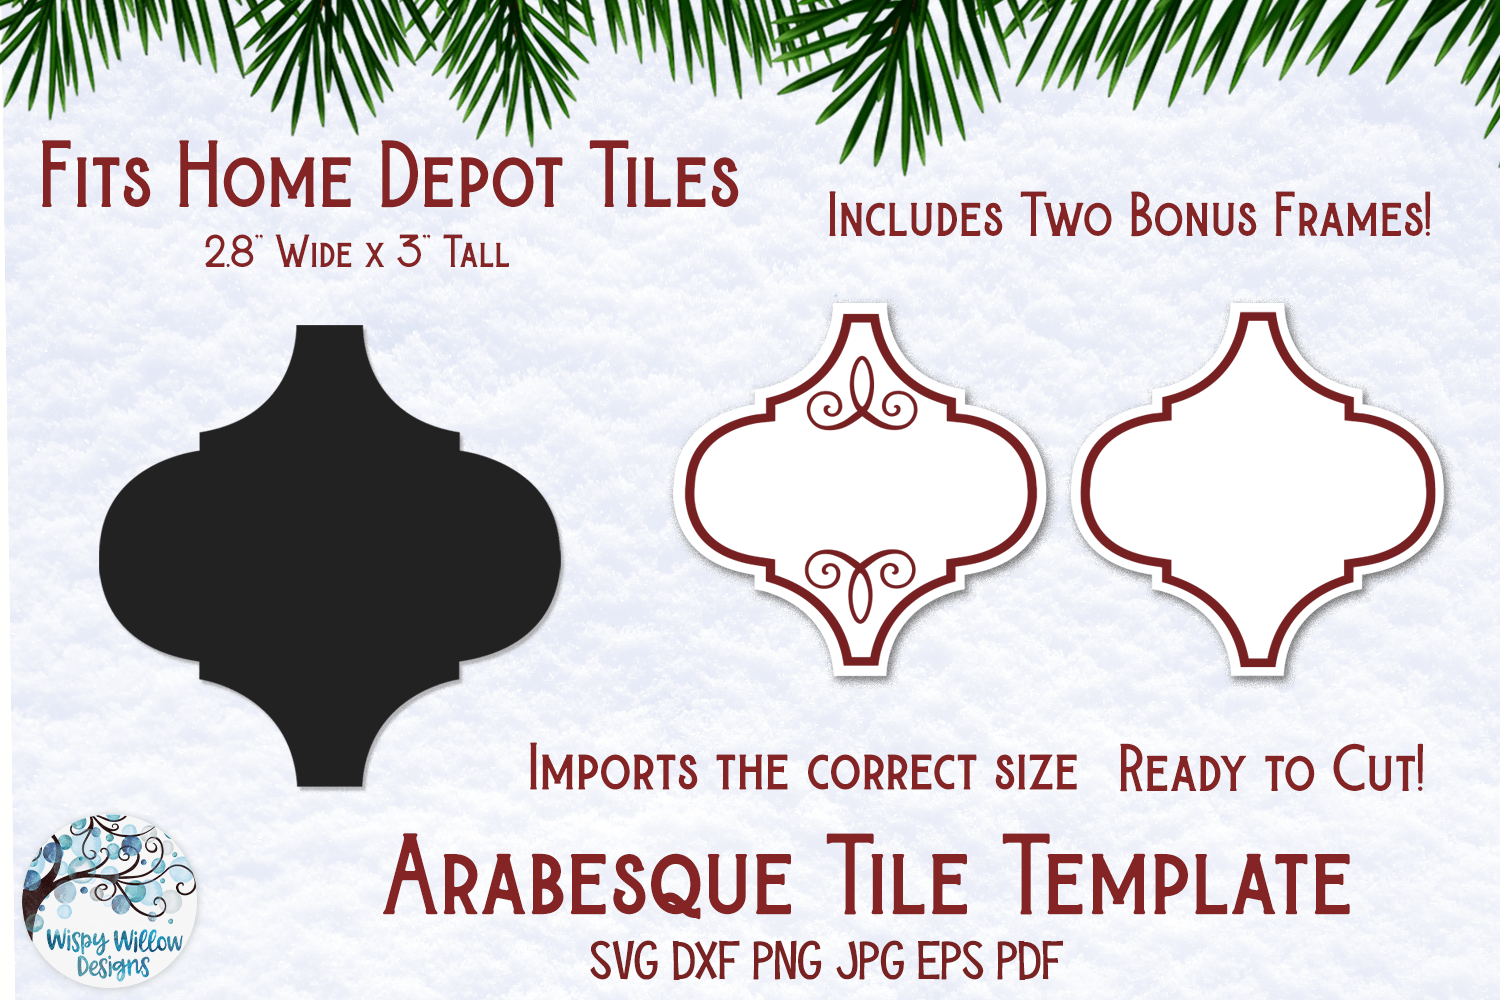 Arabesque Ornament Tile Template and Frames | Home Depot Tiles Wispy Willow Designs Company